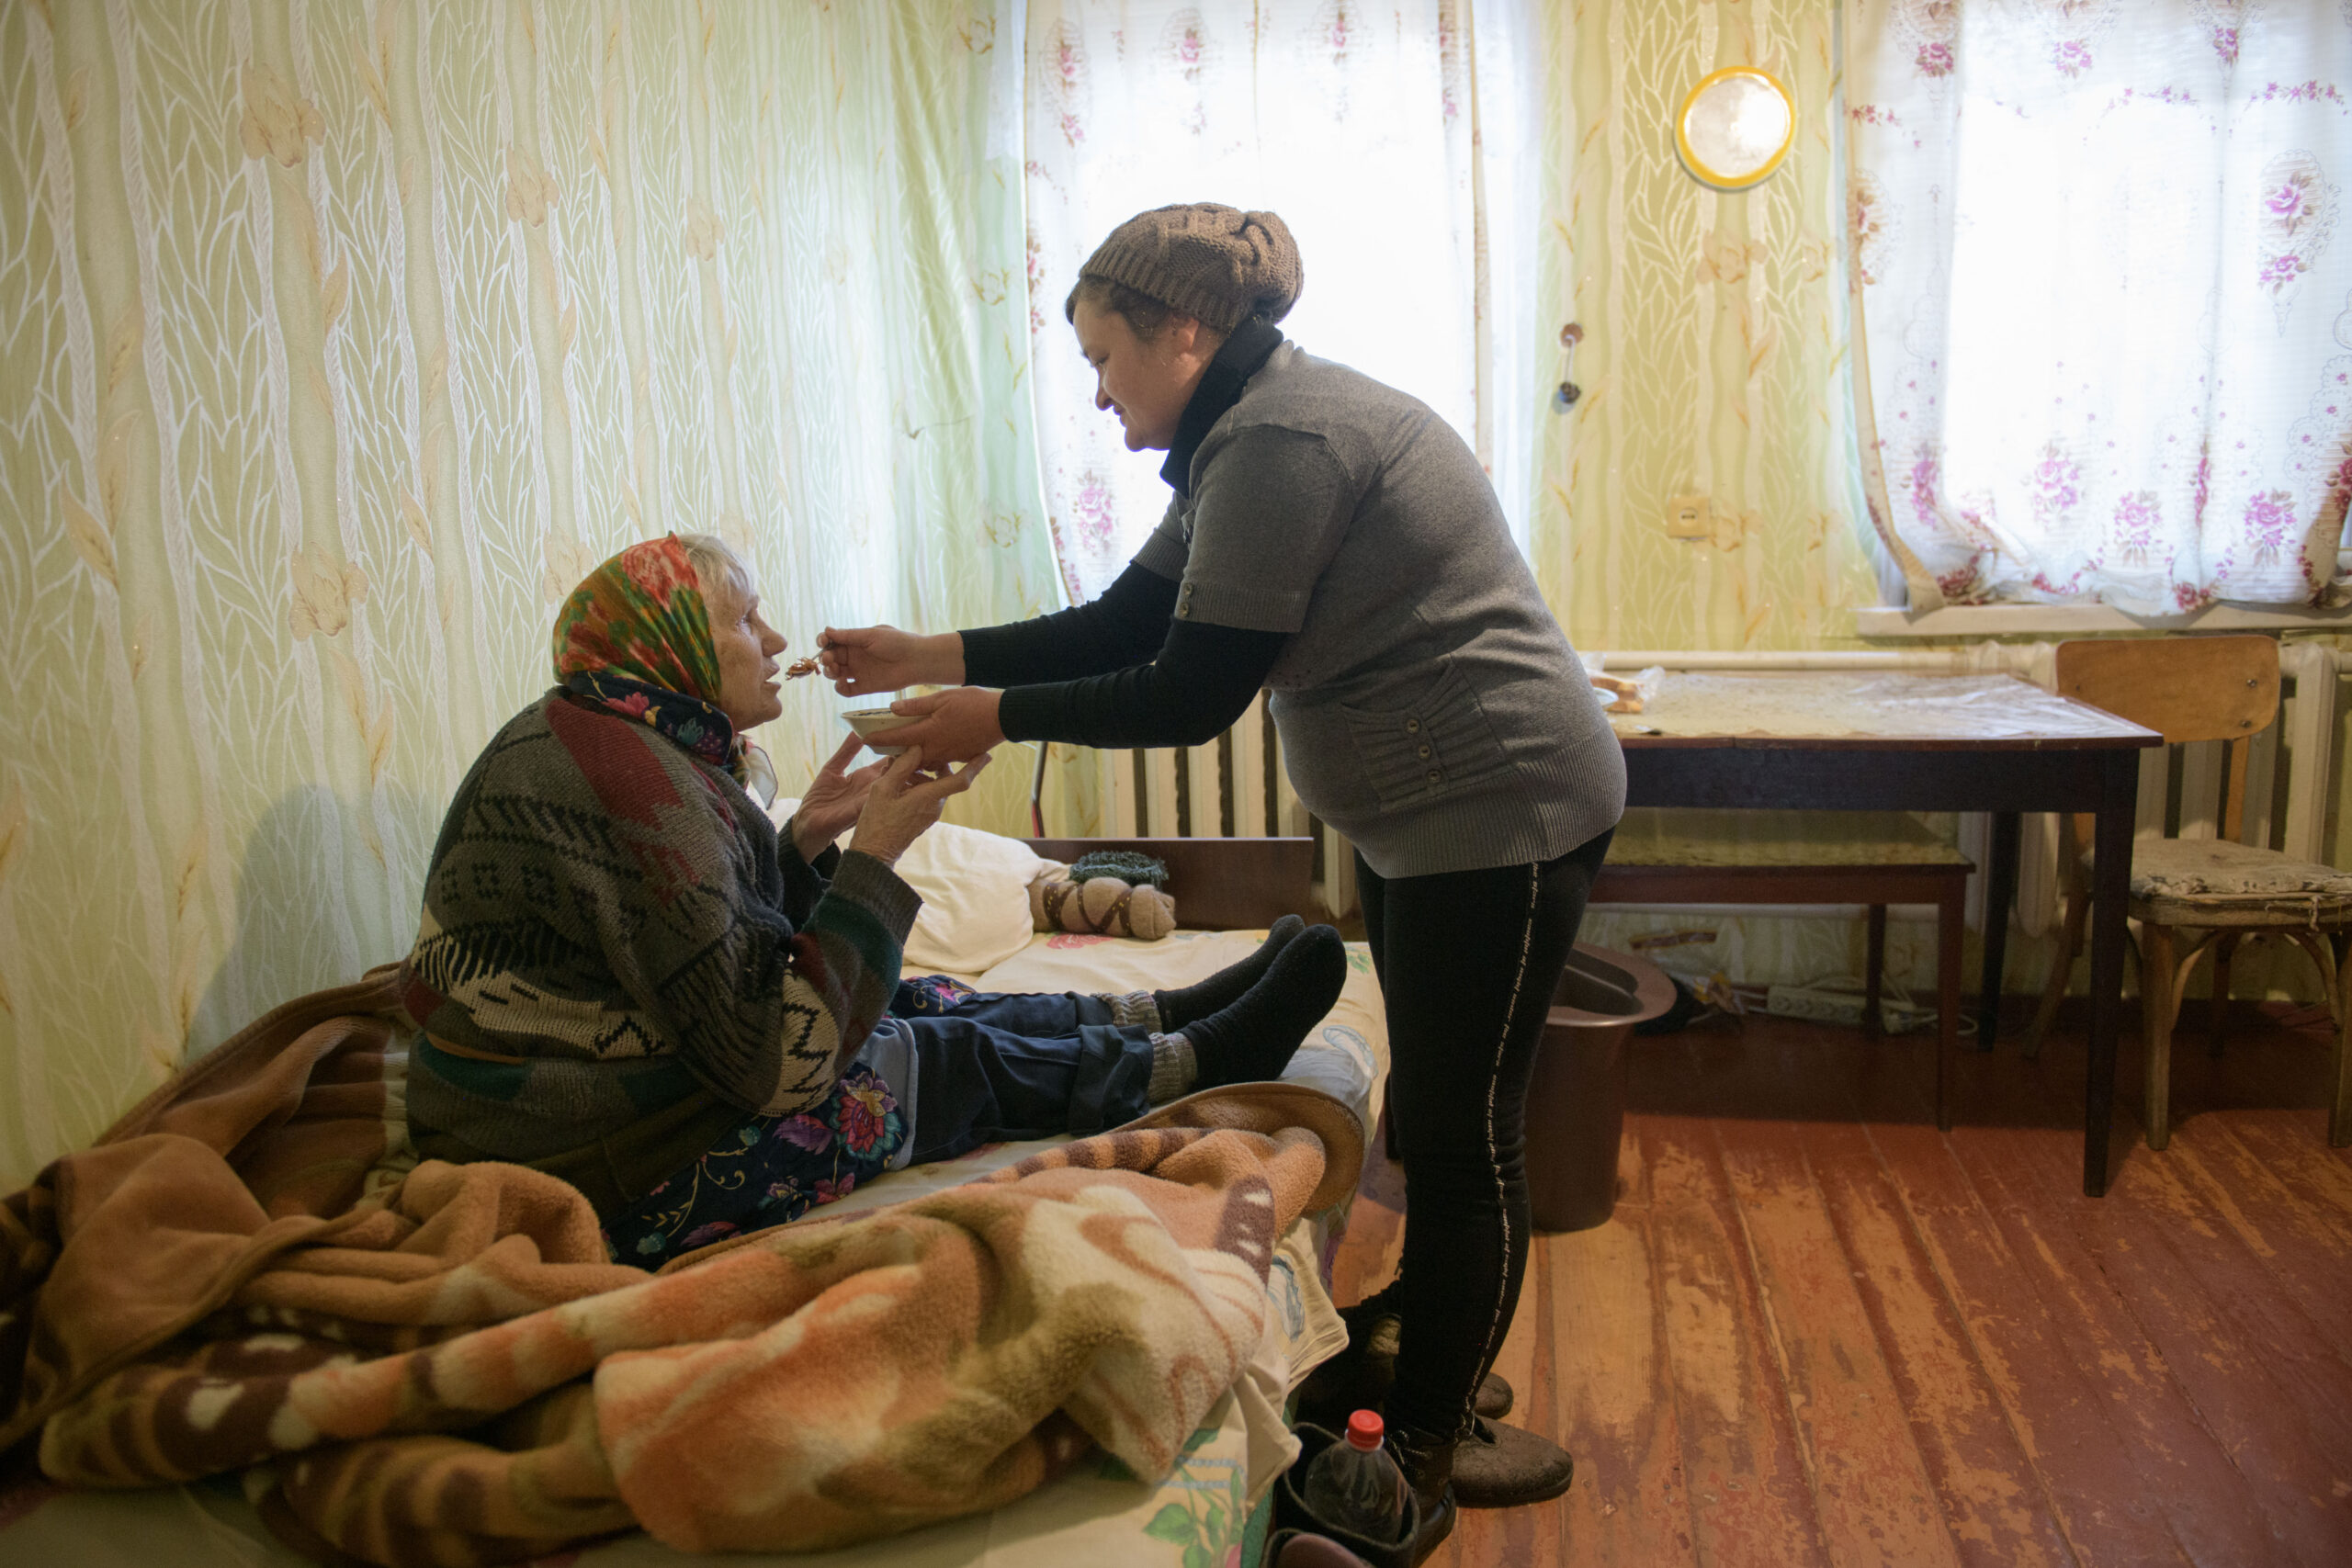 Ukraine: Russian invasion has forced older people with disabilities to endure isolation and neglect – new report